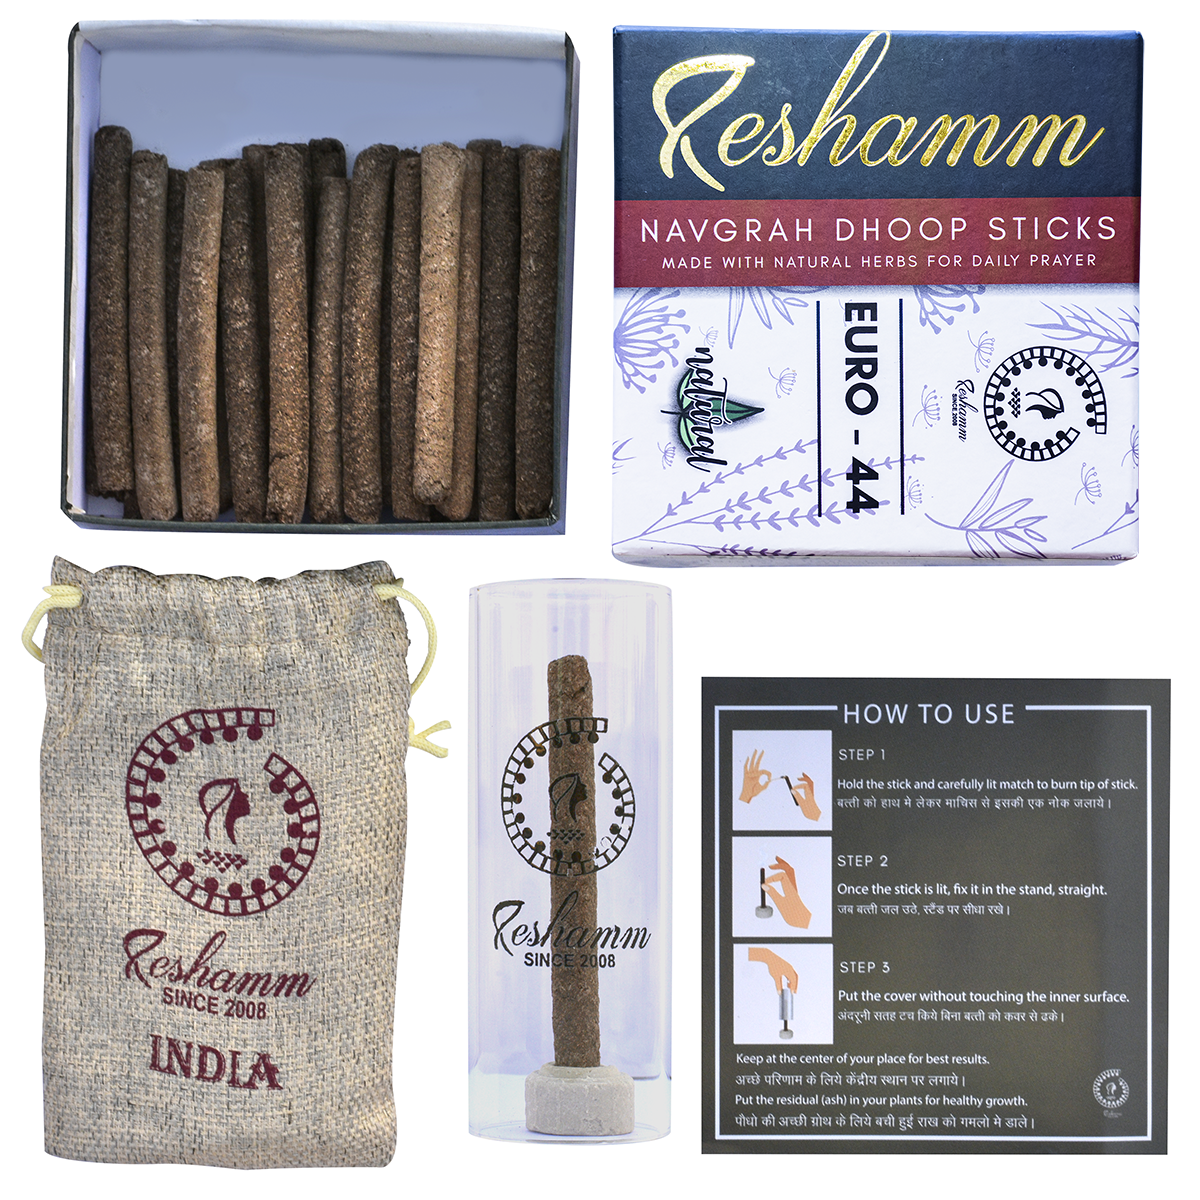 Smokeless Navgrah Dhoop Stick (Euro 44) with 44 Natural Herbs for daily Pooja for all Navgrah planets Sun to Rahu, Ketu and deities. Home shop office prayer (Lab certified No Chemical No Artificial Fragrance No Baans/Bamboo stick). 1 month consumption